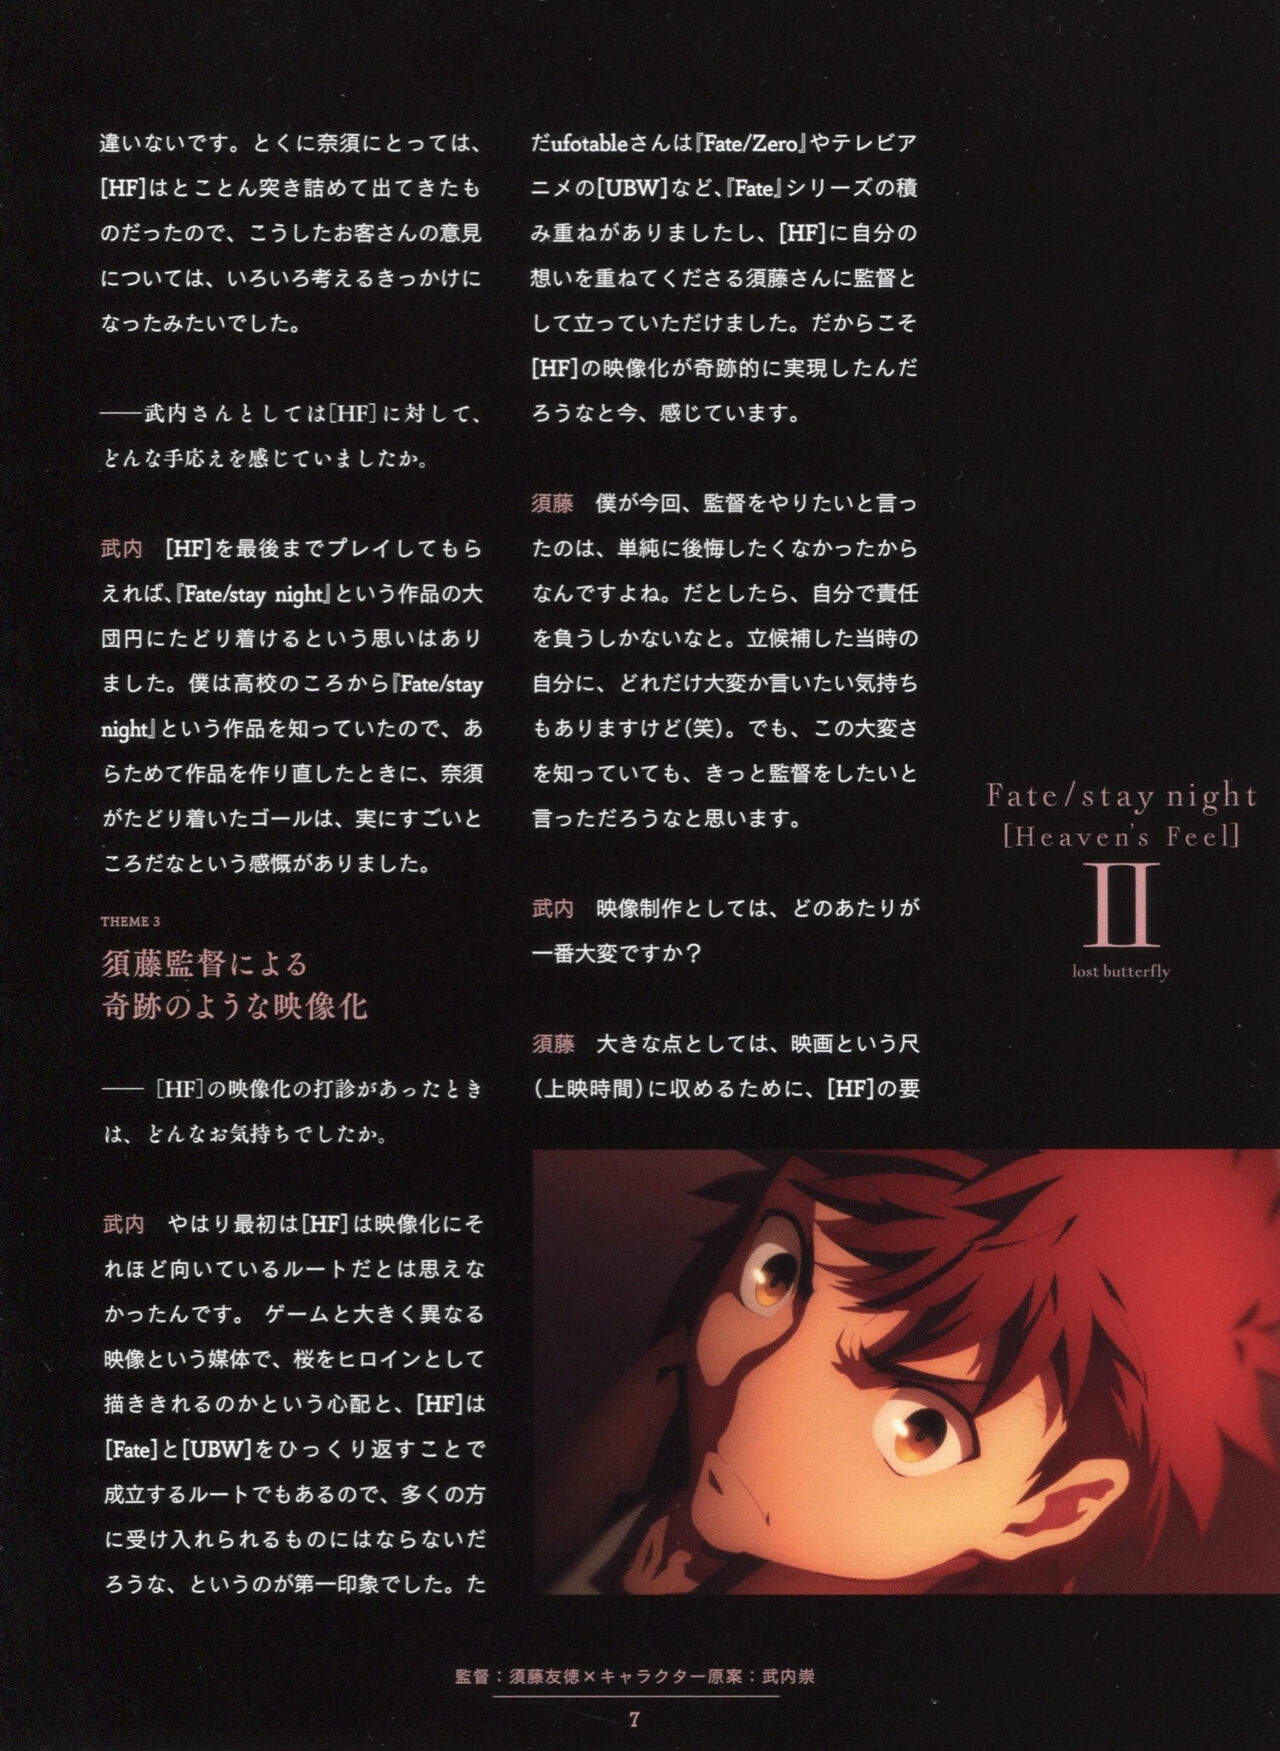 Fate/Stay Night: Heaven's Feel II - Lost Butterfly Animation Material 6